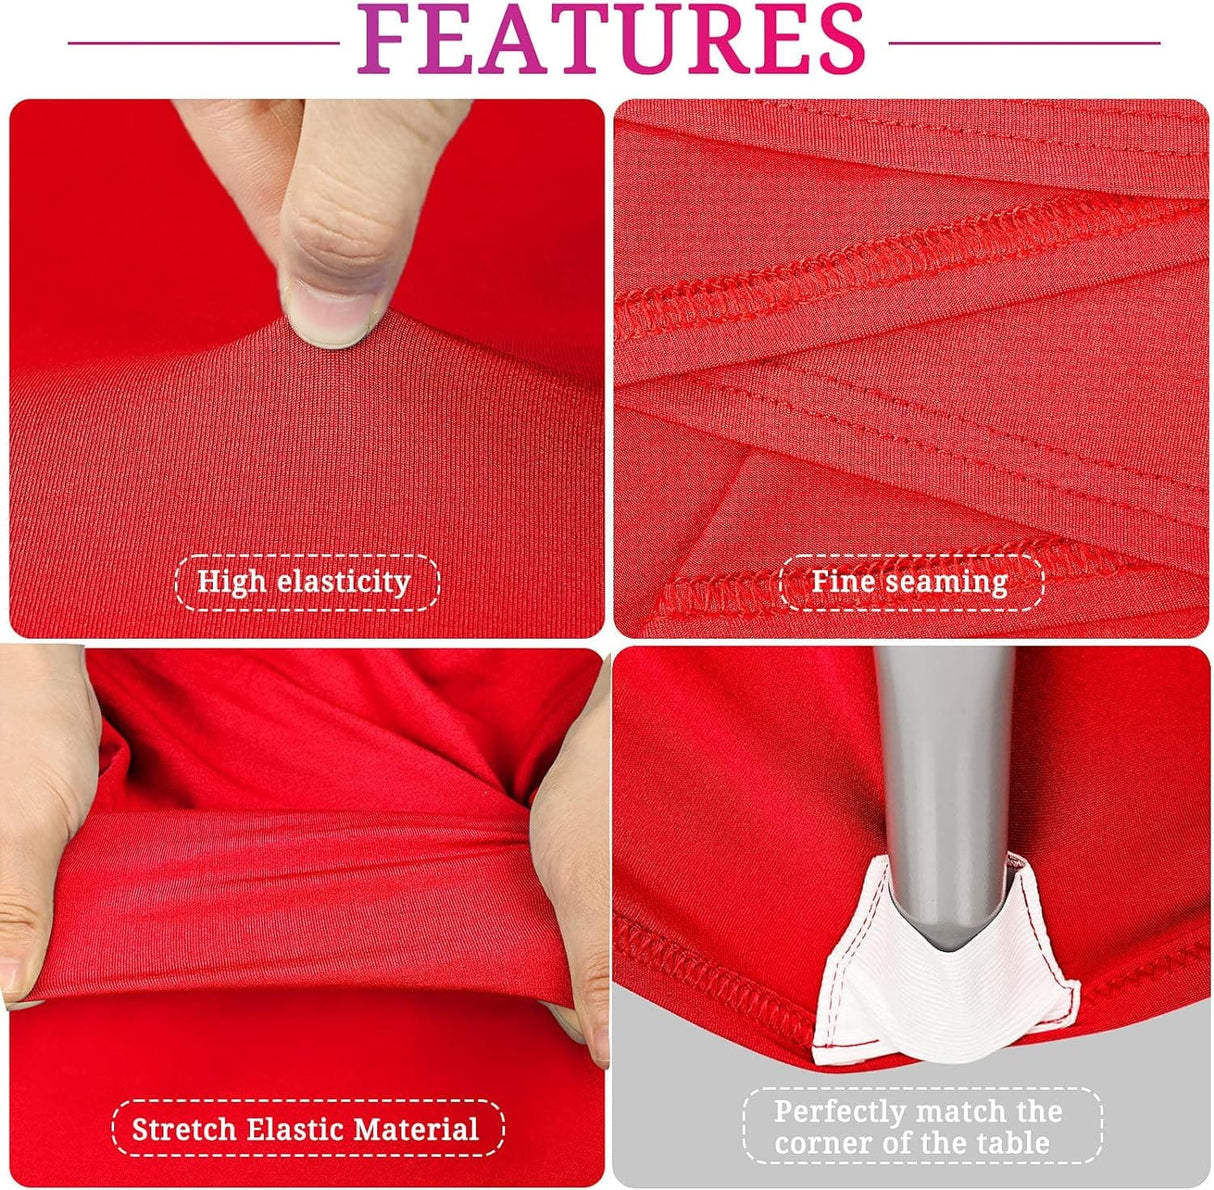 6Pack 6FT Spandex Table Covers,Red Spandex Table Cover,Spandex Elastic Tablecloth Fitted Rectangular Table Protector for Birthday Party/Wedding/Craft Exhibitions